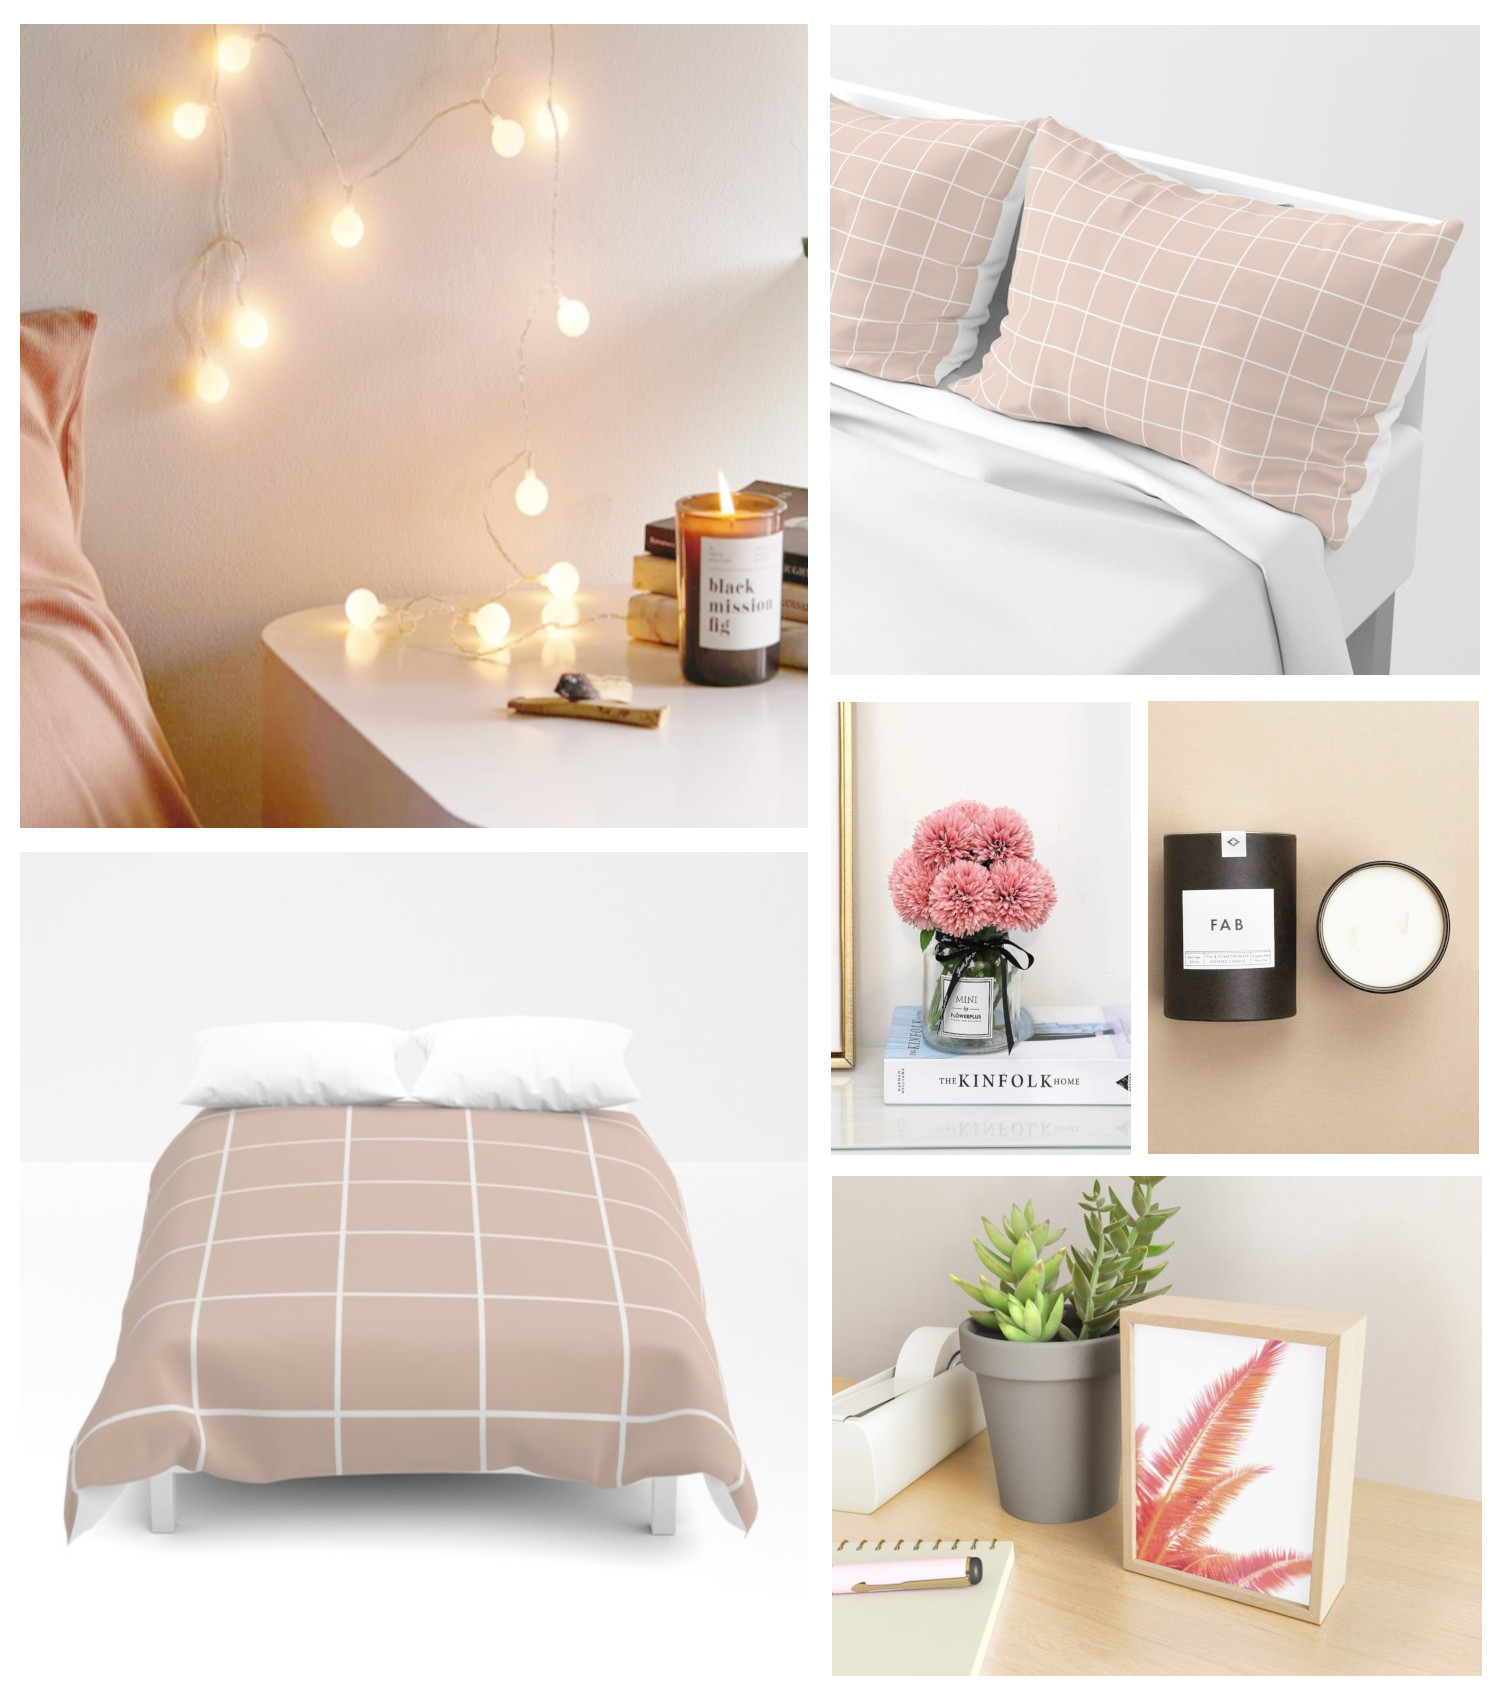 Dusty pink decor and bedding